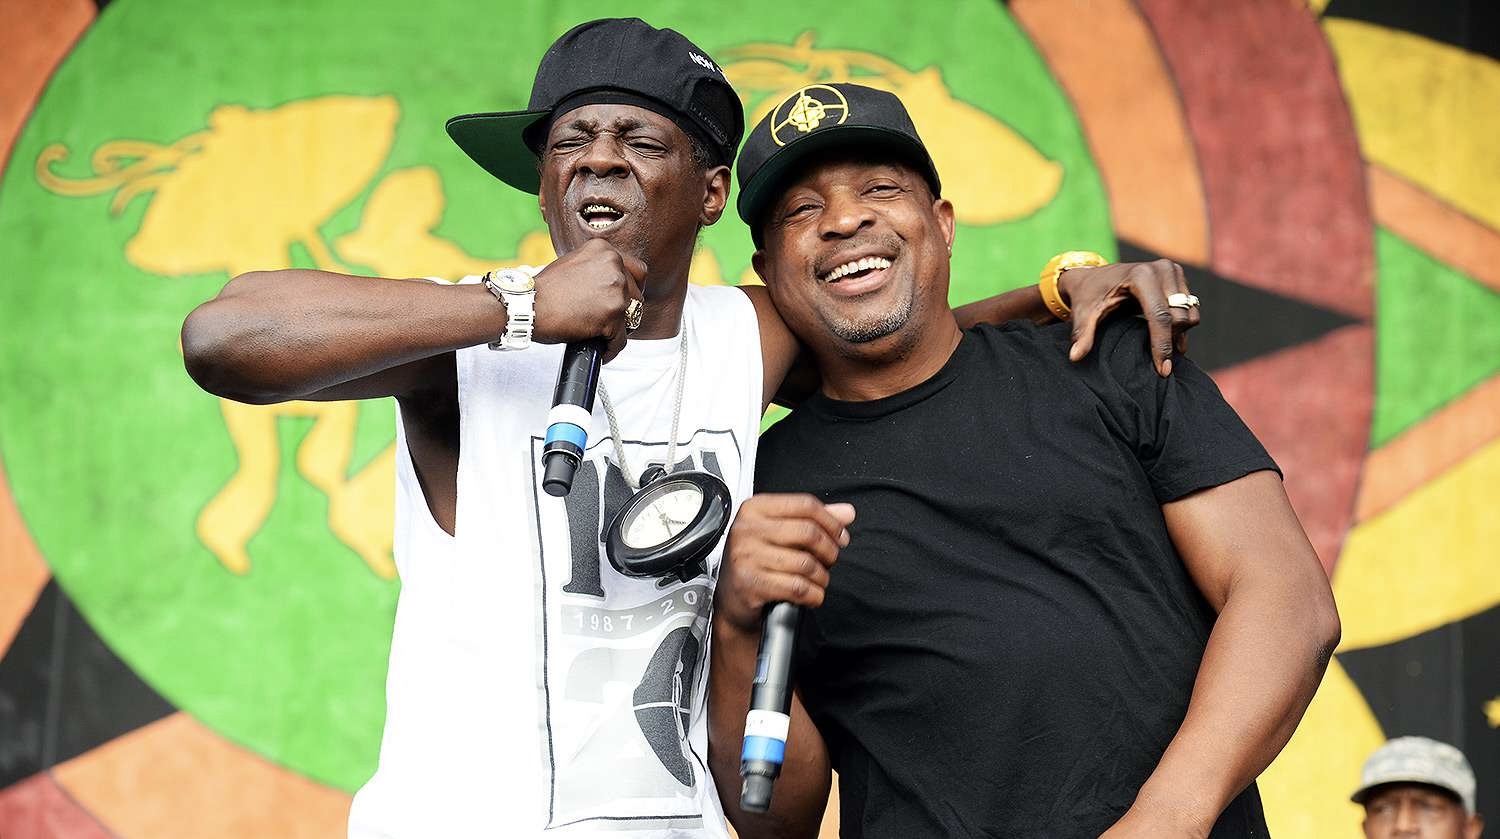 Flavor Flav Said There Was ‘No Beef’ Ever Between Him And Chuck D, Despite The Rumors Over A Break [Video]